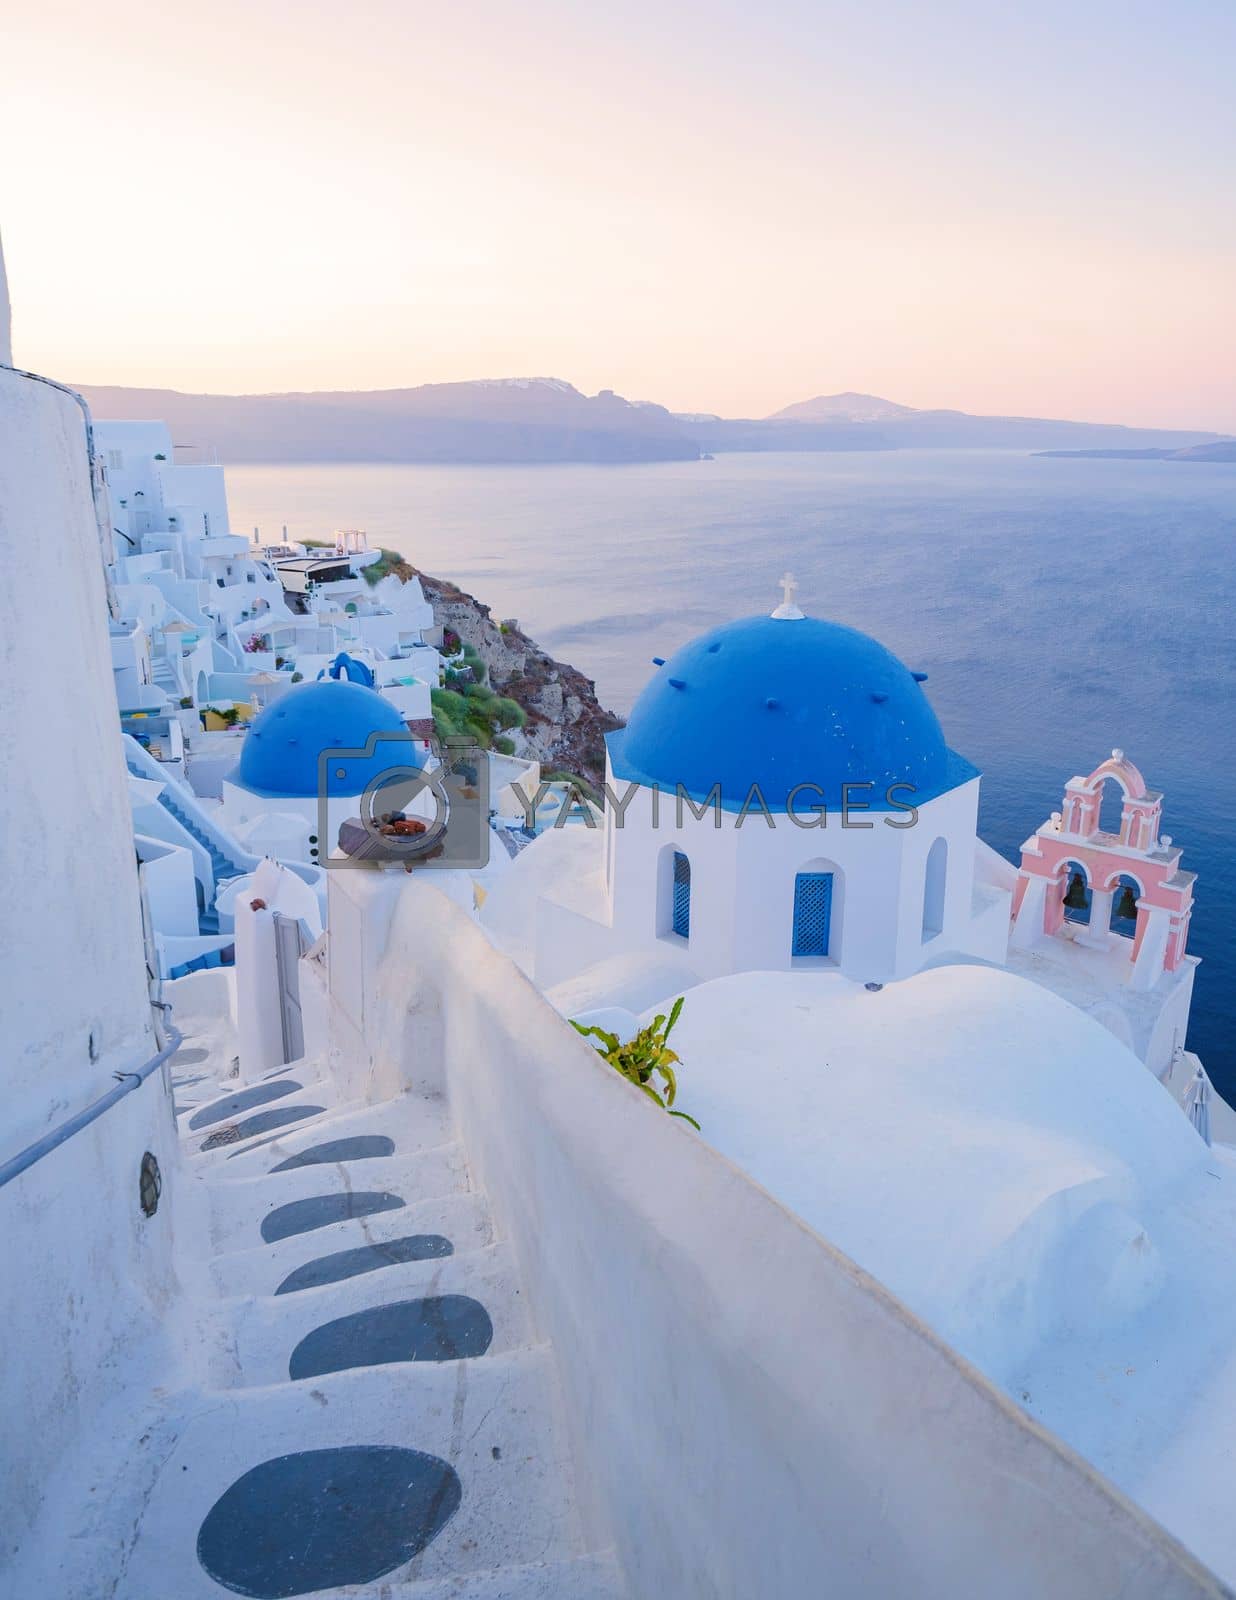 Royalty free image of sunrise by the ocean of Oia Santorini Greece, traditional Greek village by fokkebok